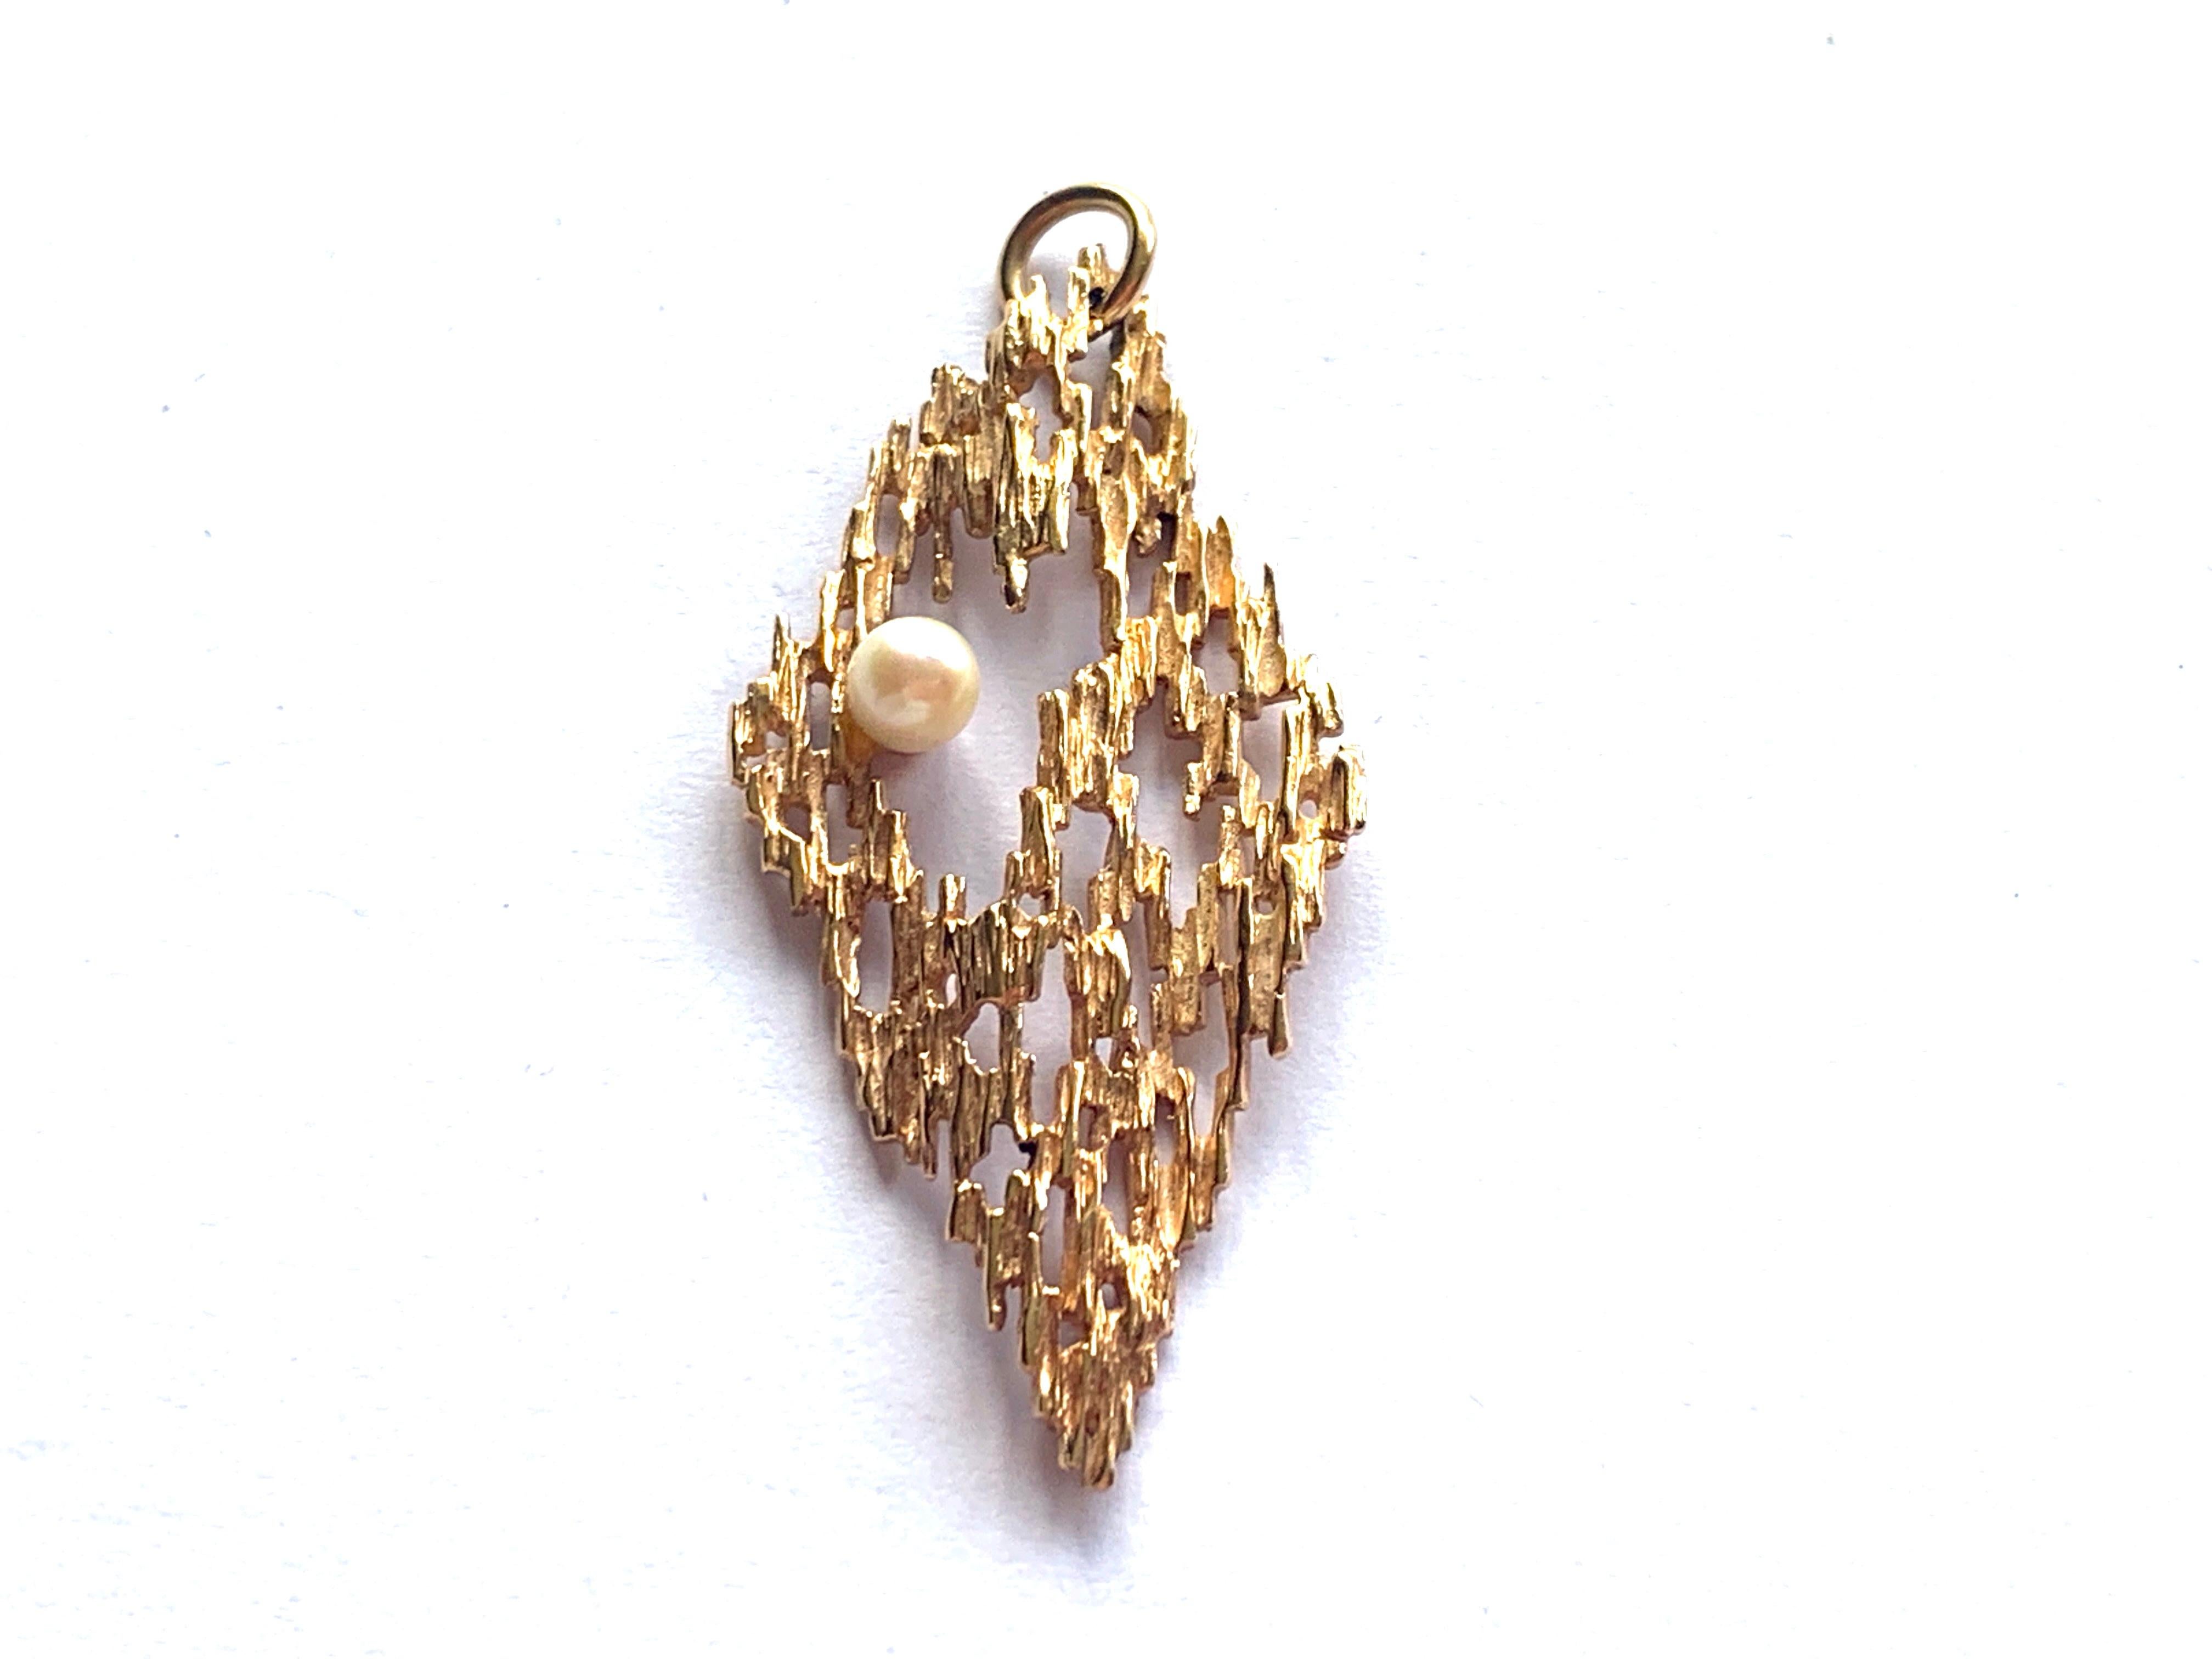 9ct Gold Vintage Brutalist design Cultured Pearl Pendant
Statement piece
size 5cm x 2.5cm ( not incl. jump ring )
Fully Hallmarked on reverse
Circa 1970s.